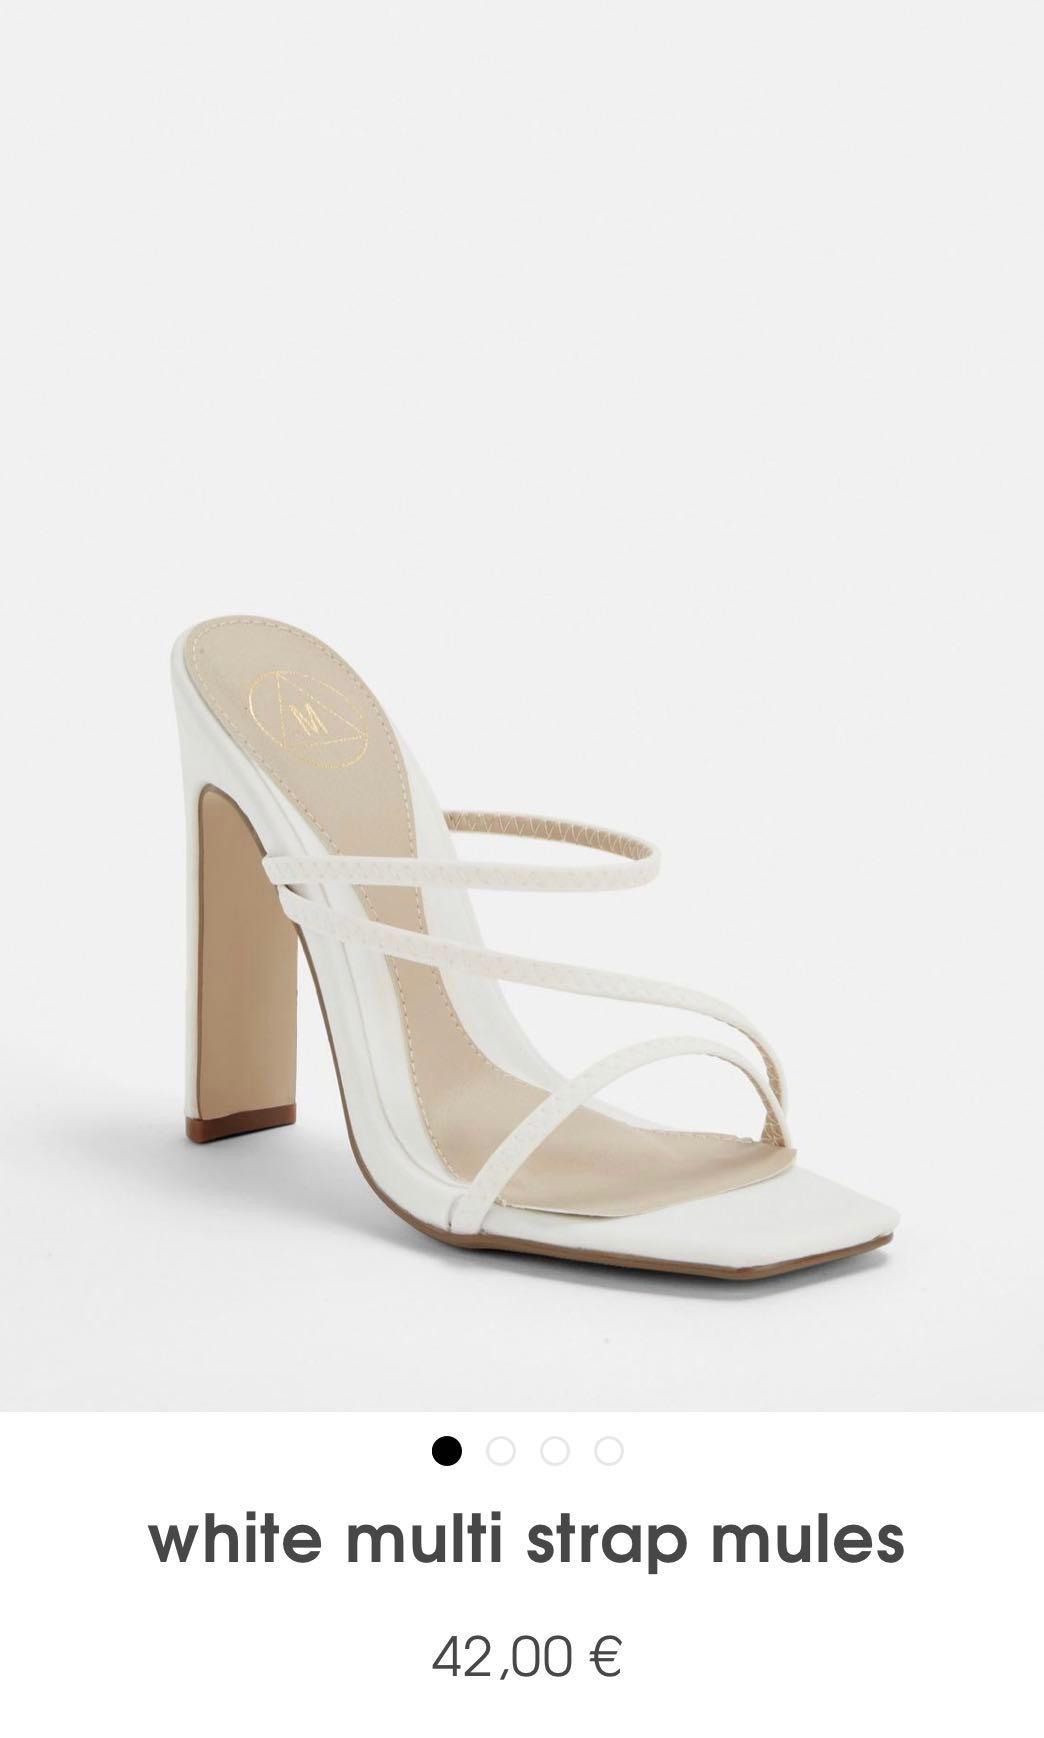 Missguided white strappy heels, Women's 